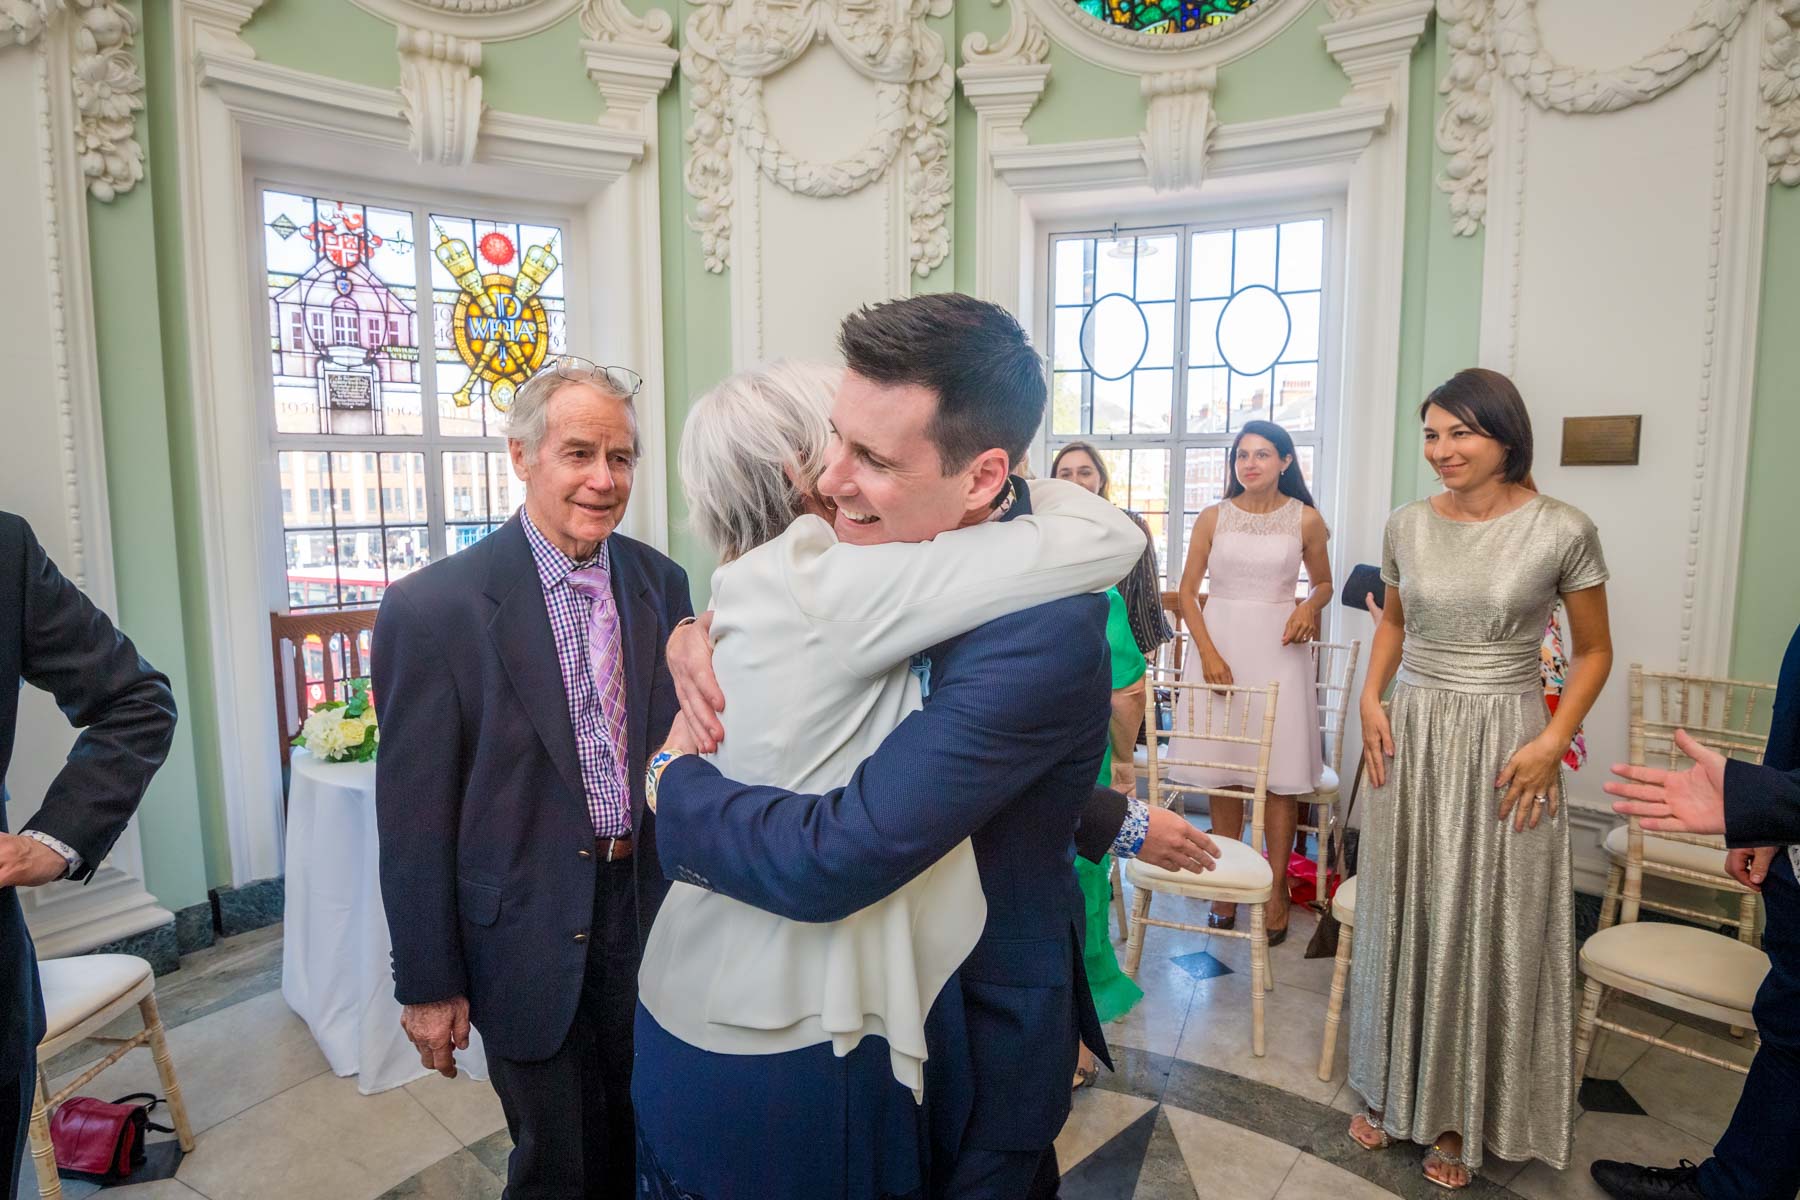 The groom's mum hugs him after a wedding at Lambeth Town Hall in Brixton